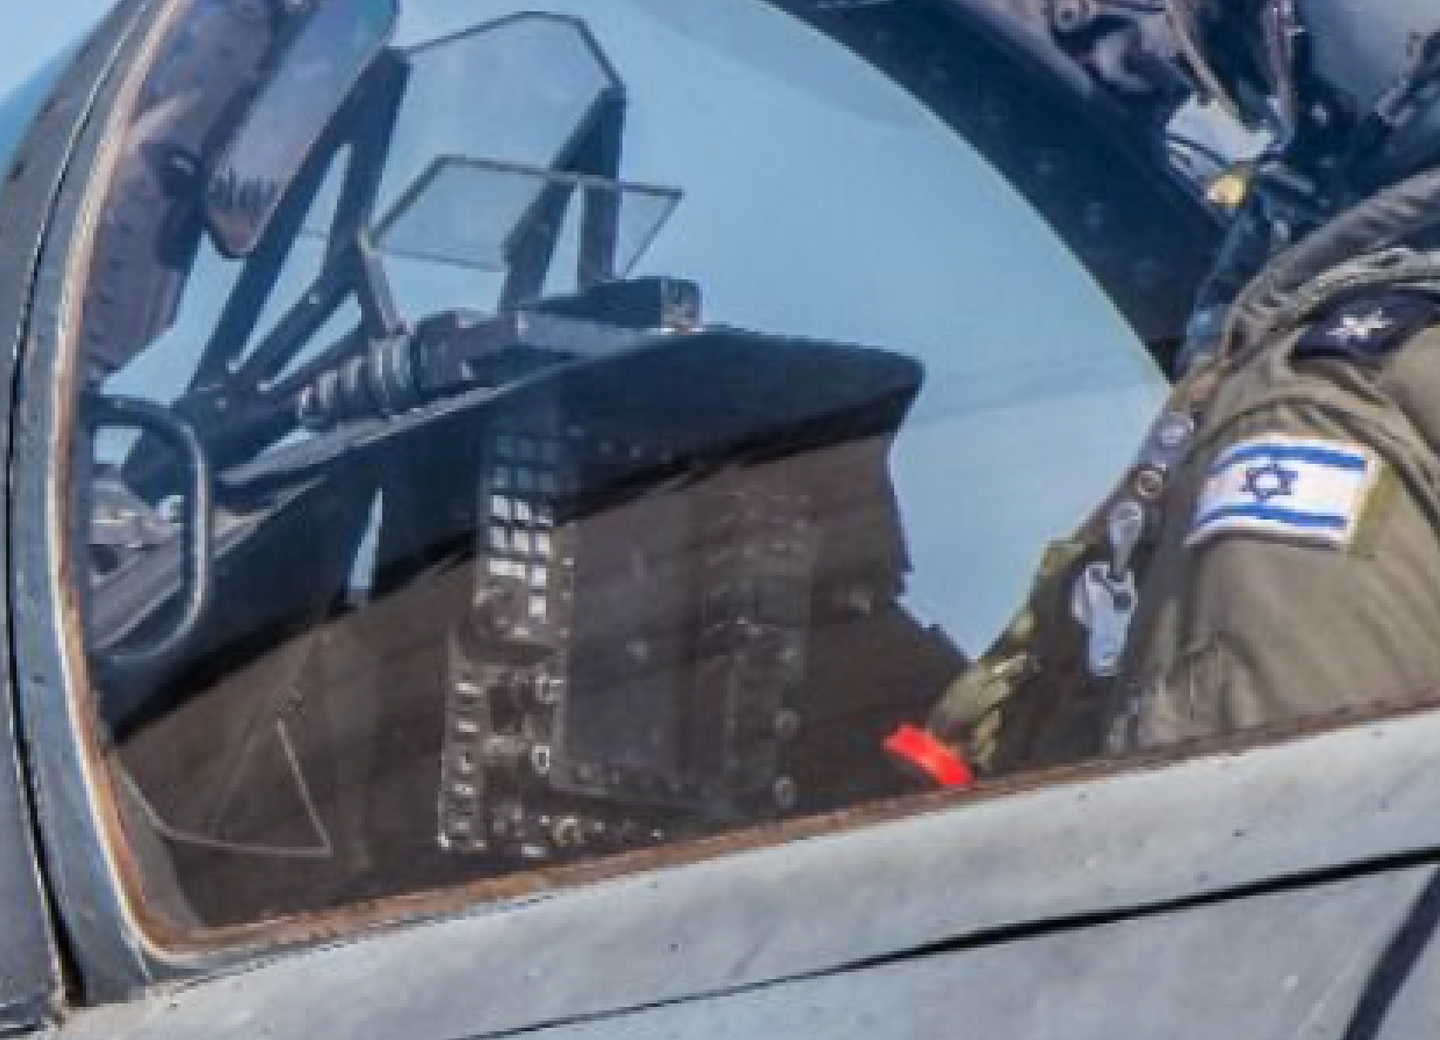 A poor quality but nonetheless interesting close-up view of the multifunctional display in the upgraded F-15A cockpit. <em>Israeli Air Force via X</em>